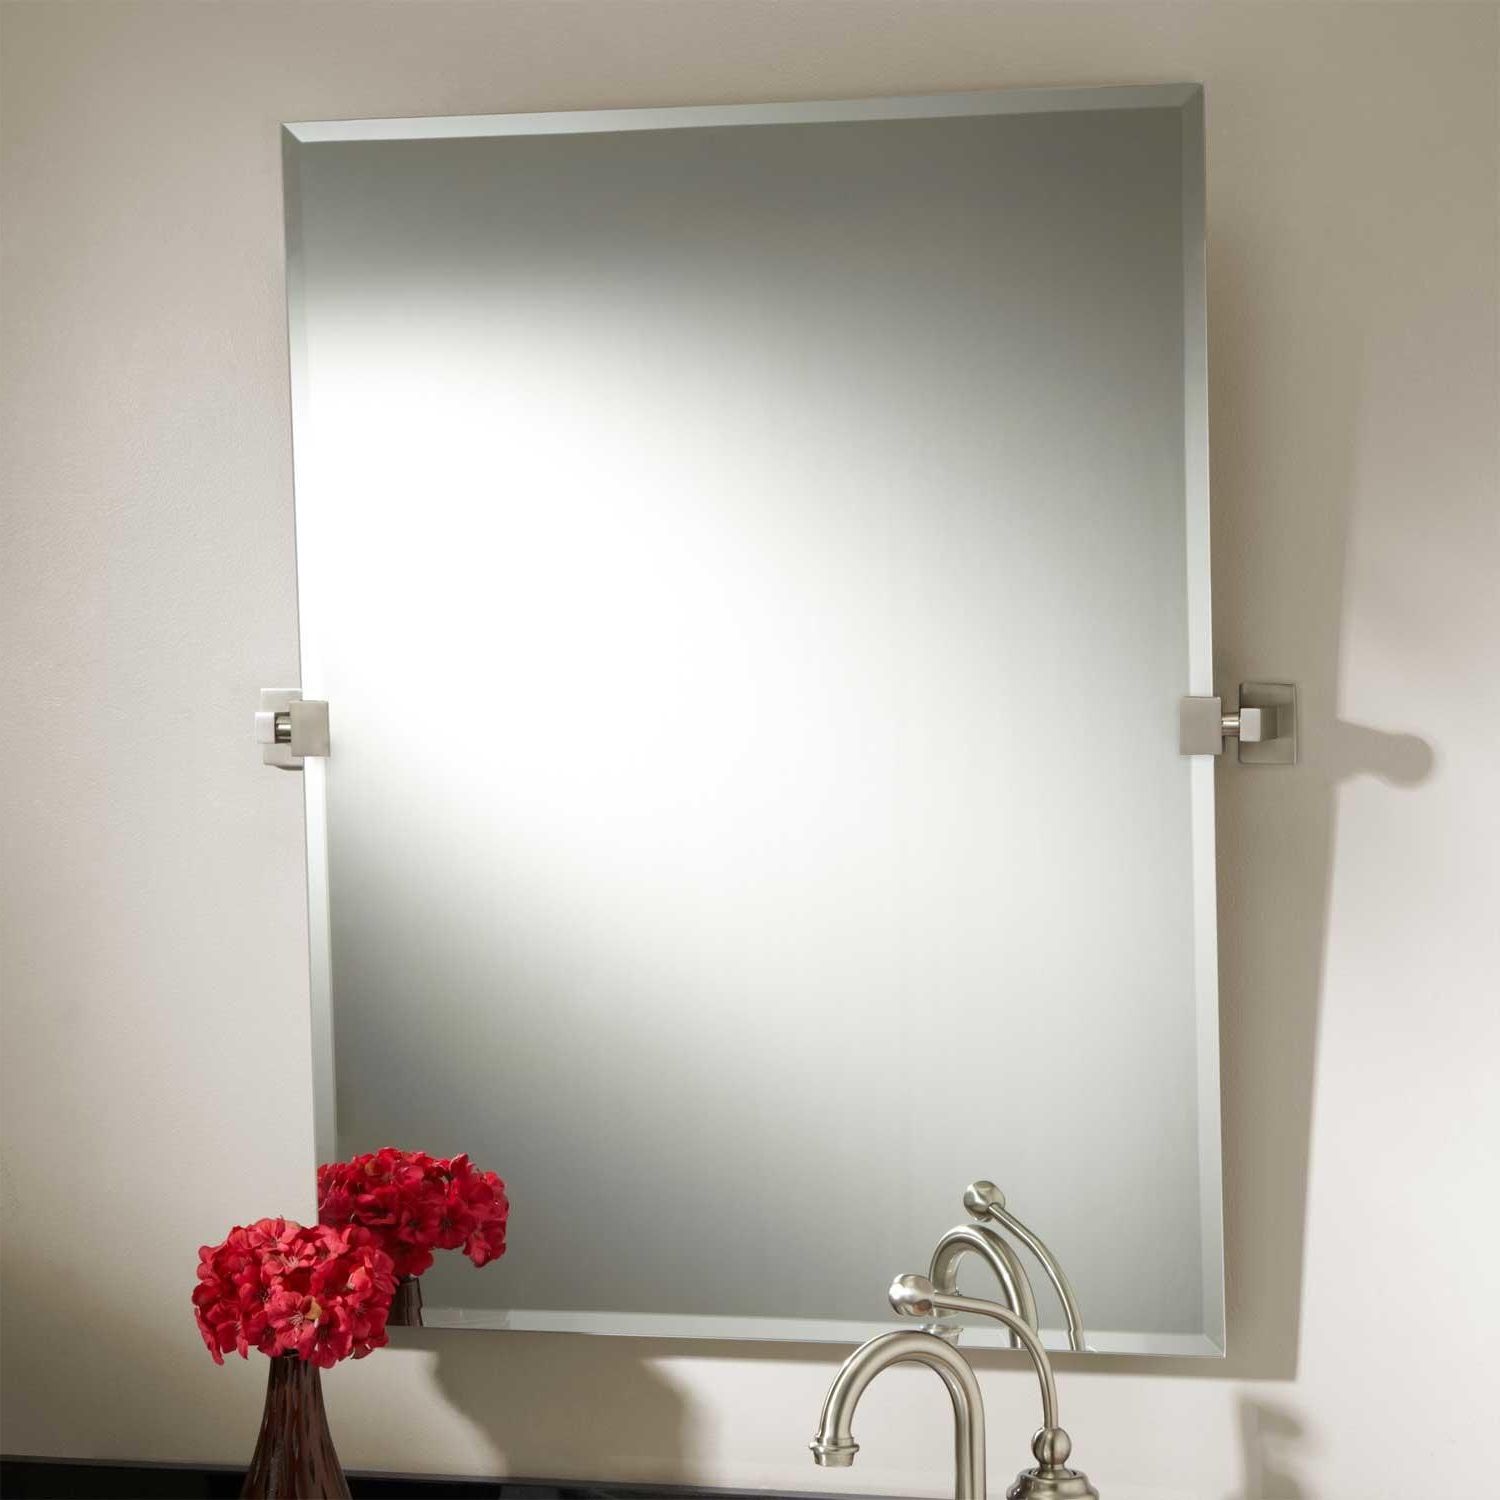 Widely Used Tilt Wall Mirrors Throughout Bathroom: 32 In Helsinki Rectangular Tilting Frameless (View 16 of 20)